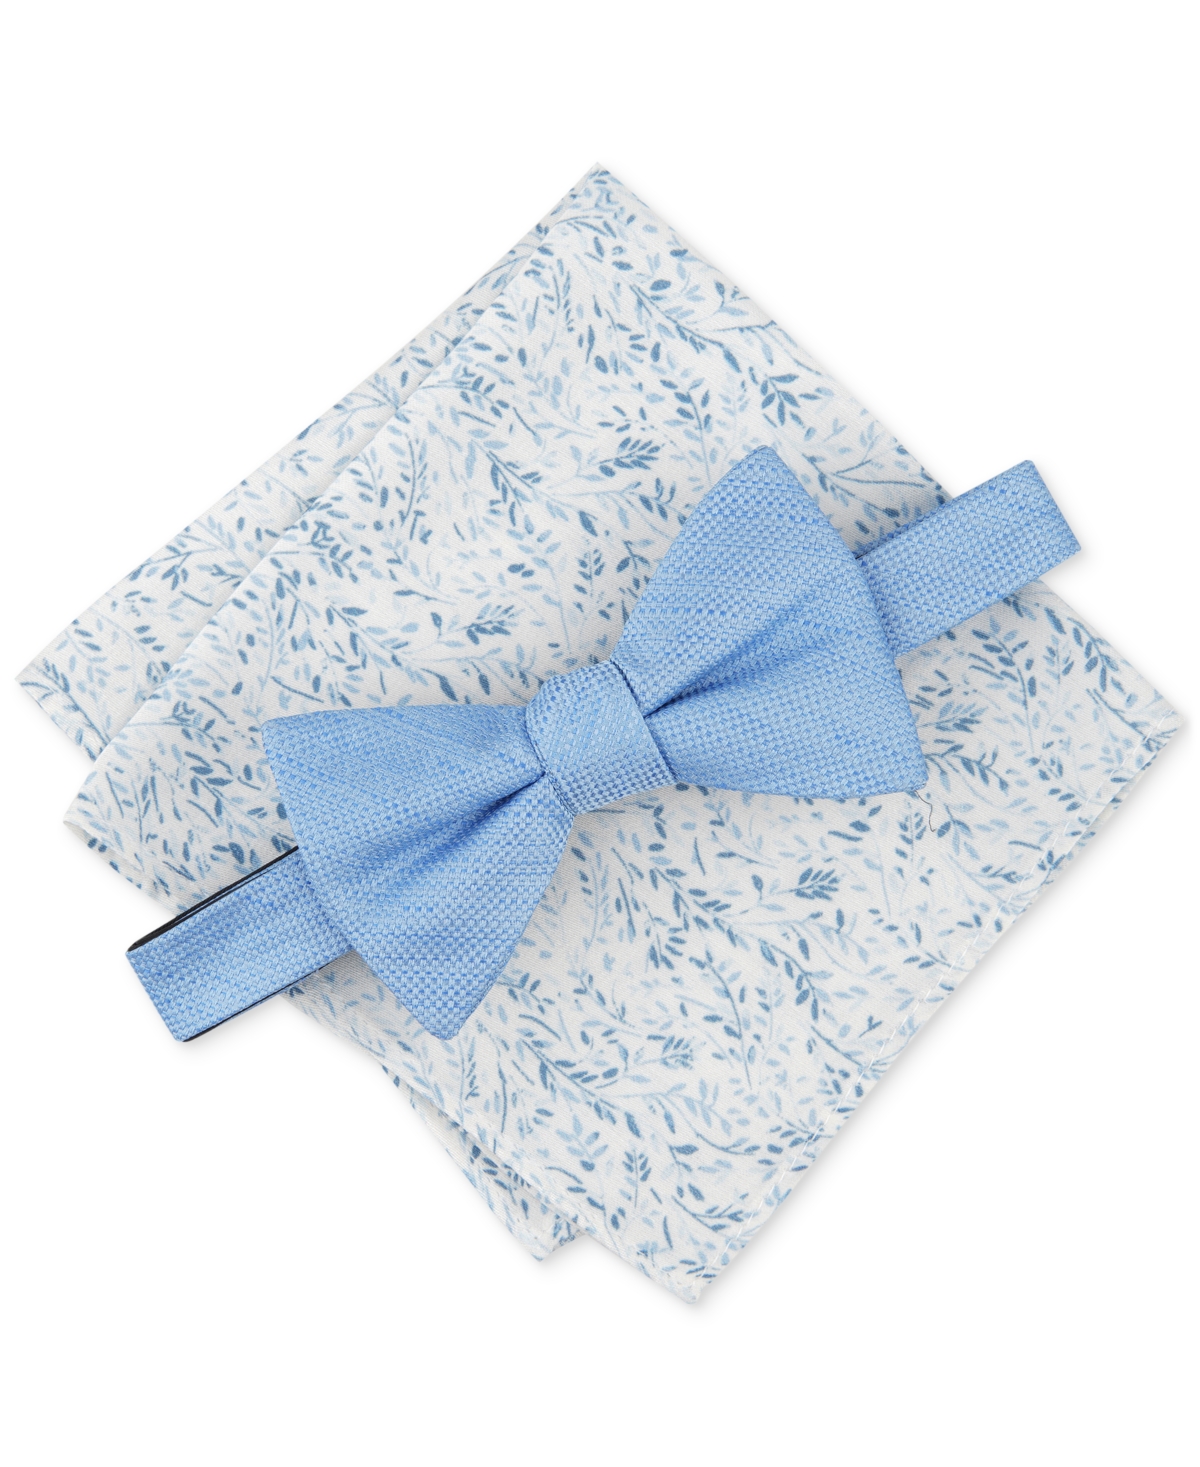 Men's Solid Bow Tie & Floral Pocket Square Set, Created for Macy's - Blue